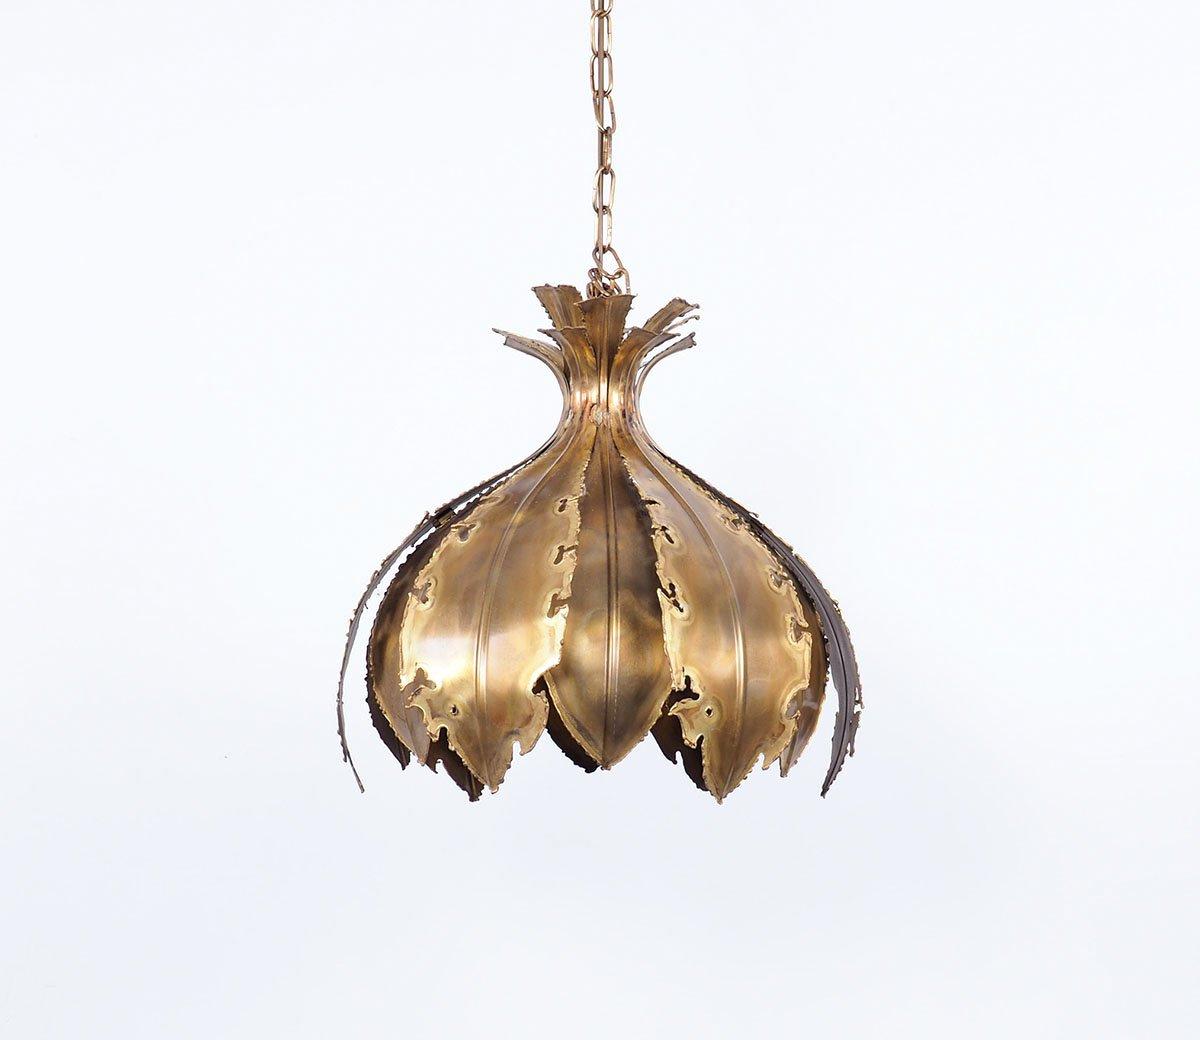 Beautiful brutalist hanging lamp from the 1960s made of brass in the shape of an onion.
Designed by Svend Aage Holm Sørensen model 6395.
The lamp is made of loose brass leaves that have been treated with acid and a burner, which gives the lamp a